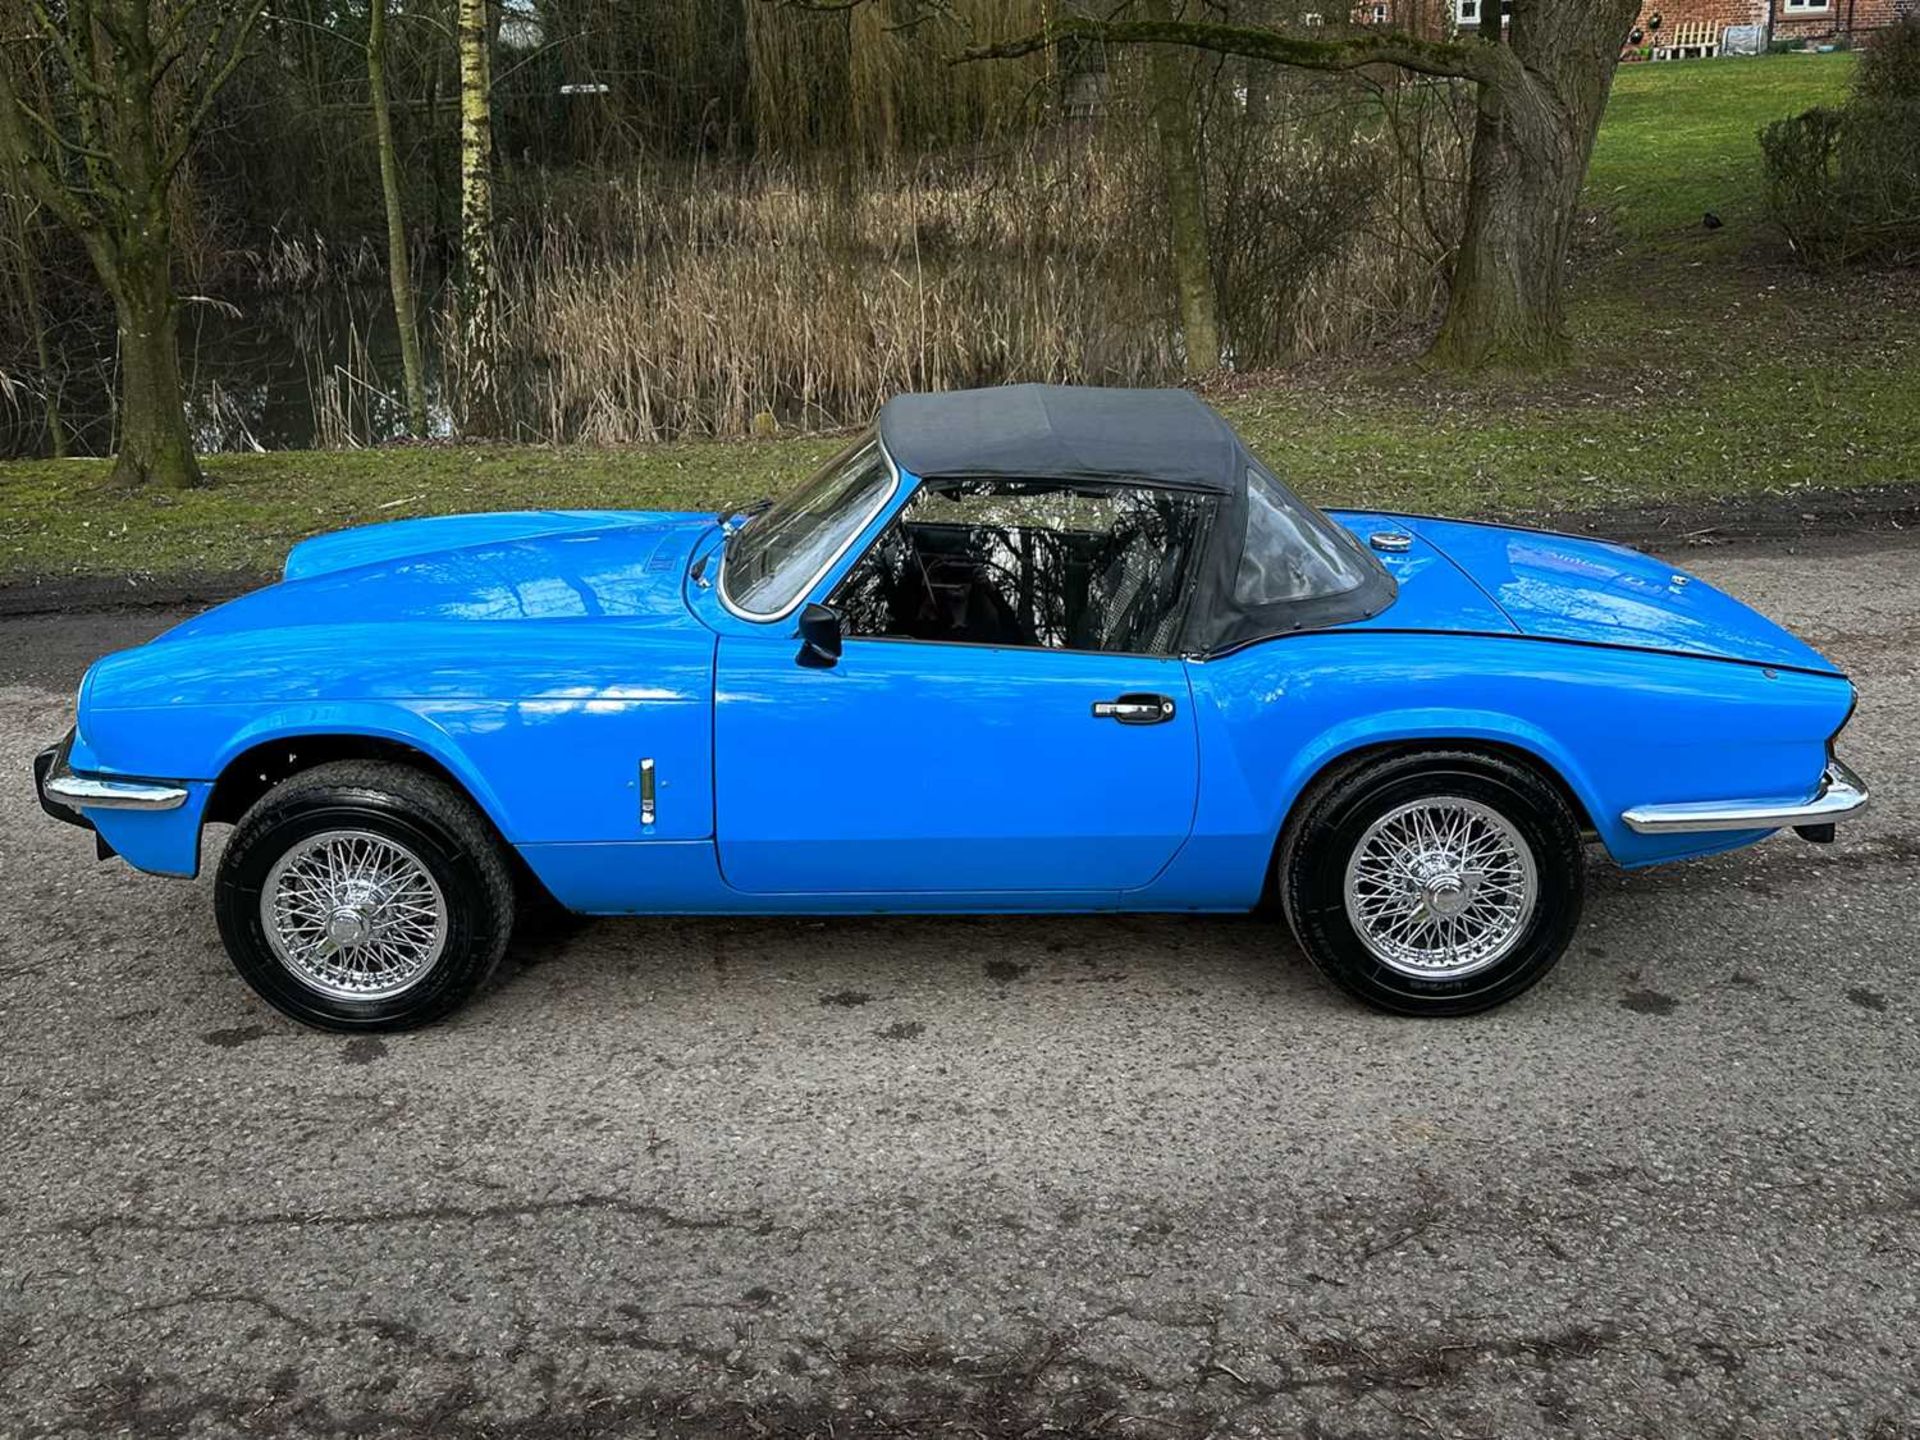 1981 Triumph Spitfire 1500 Comes with original bill of sale - Image 11 of 96